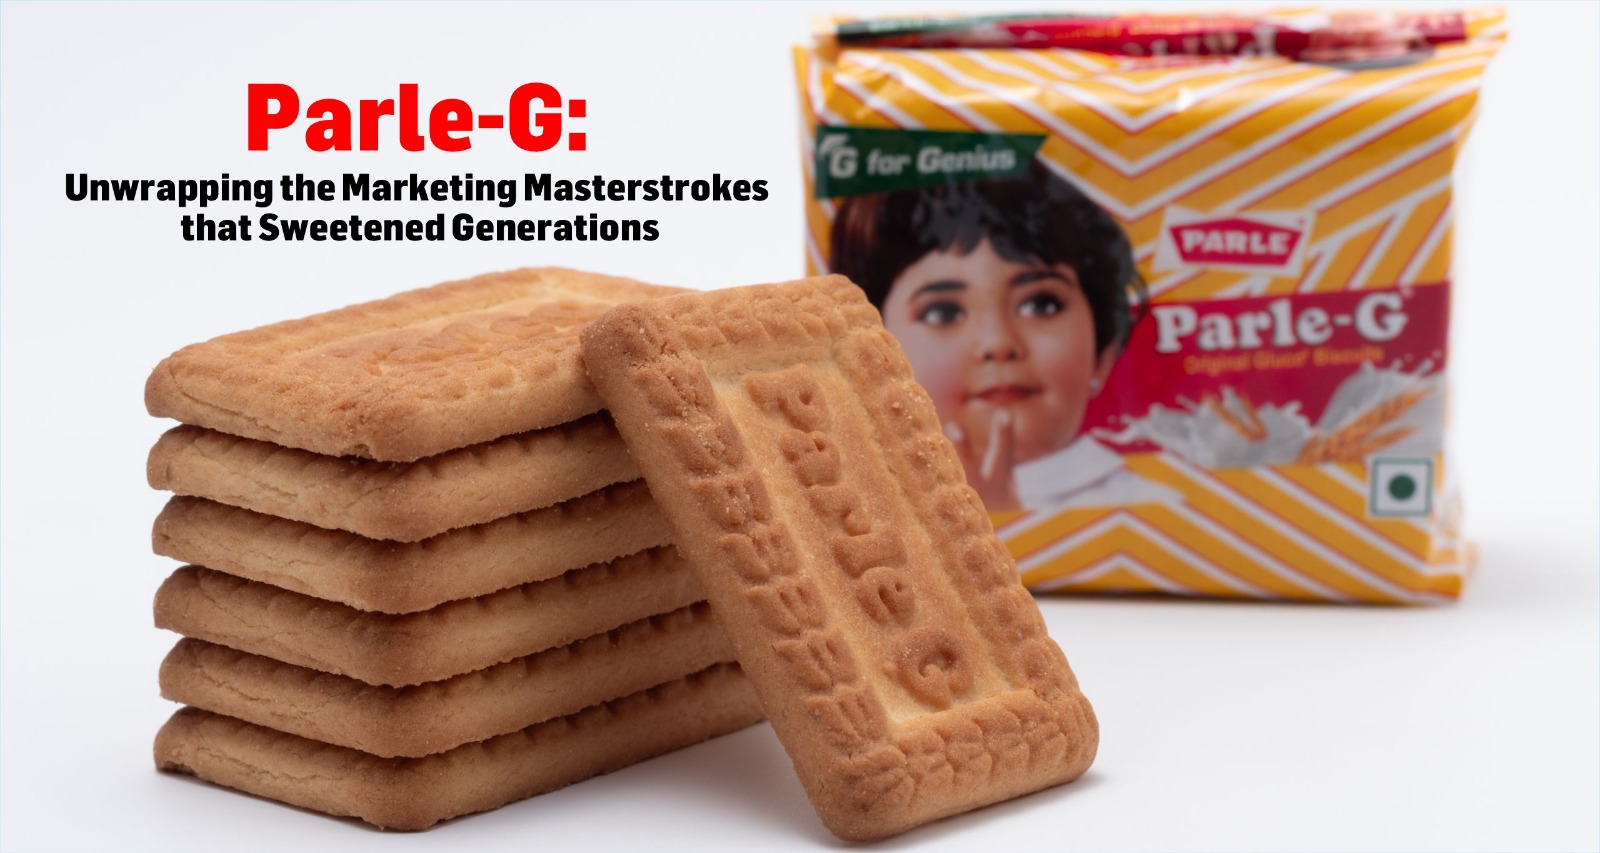 Parle-G: Unwrapping the Marketing Masterstrokes that Sweetened Generations